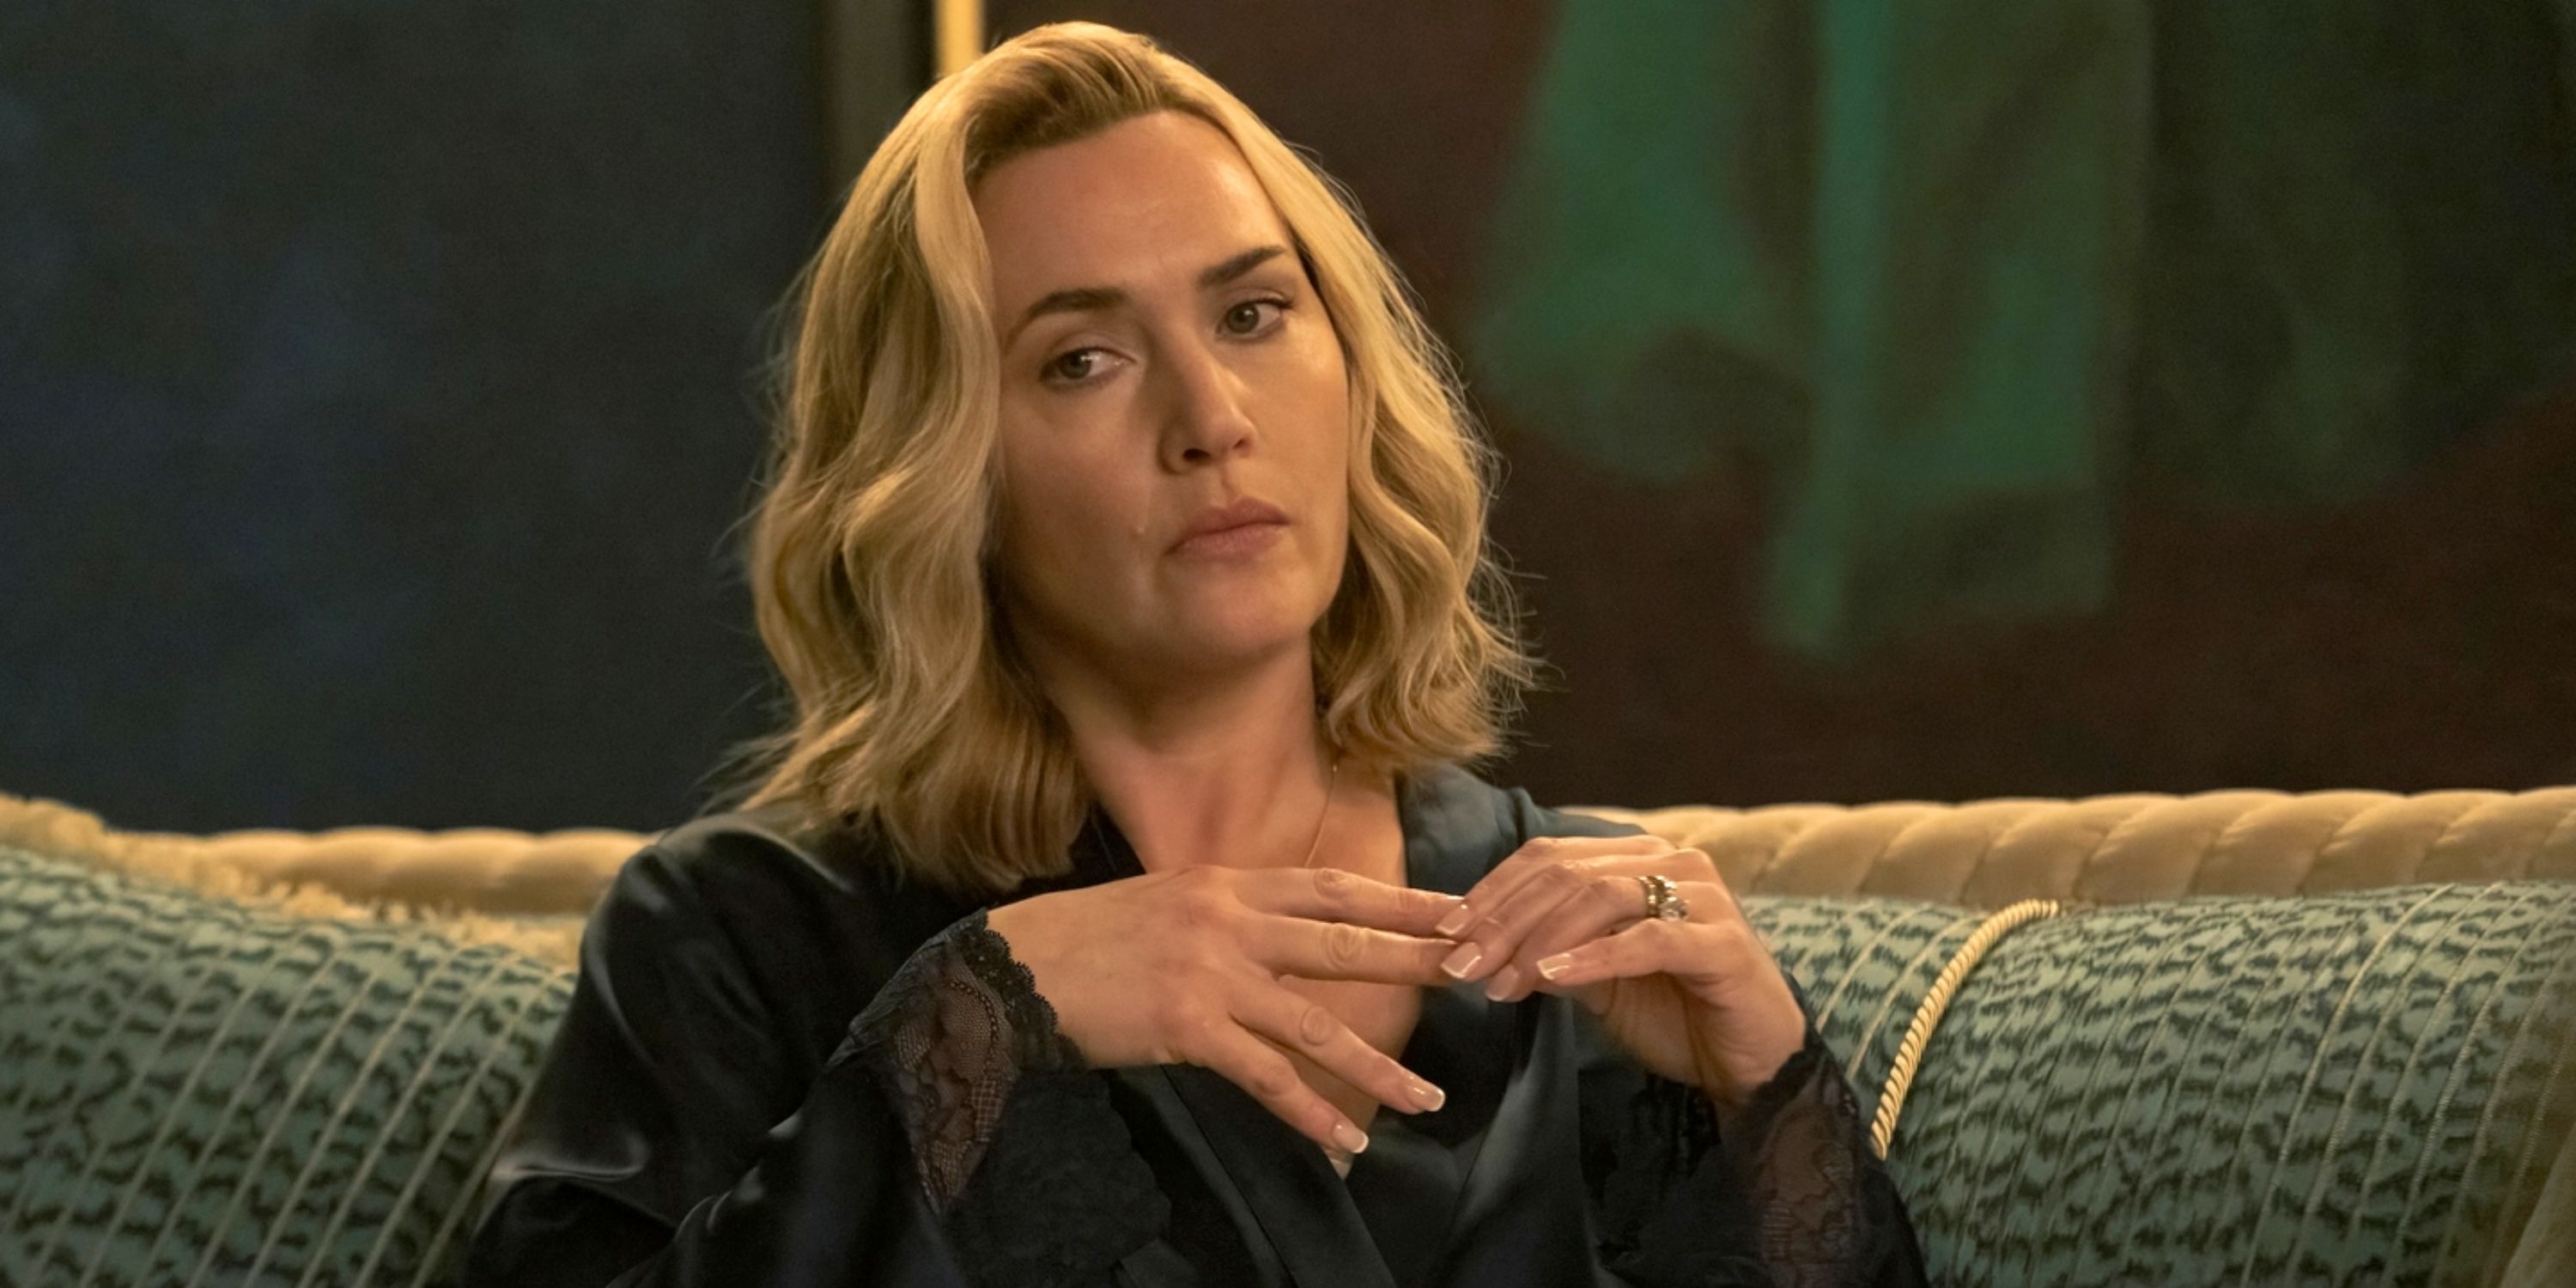 Kate Winslet as Chancellor Elena Vernham holding two fingers in Episode 2 of The Regime